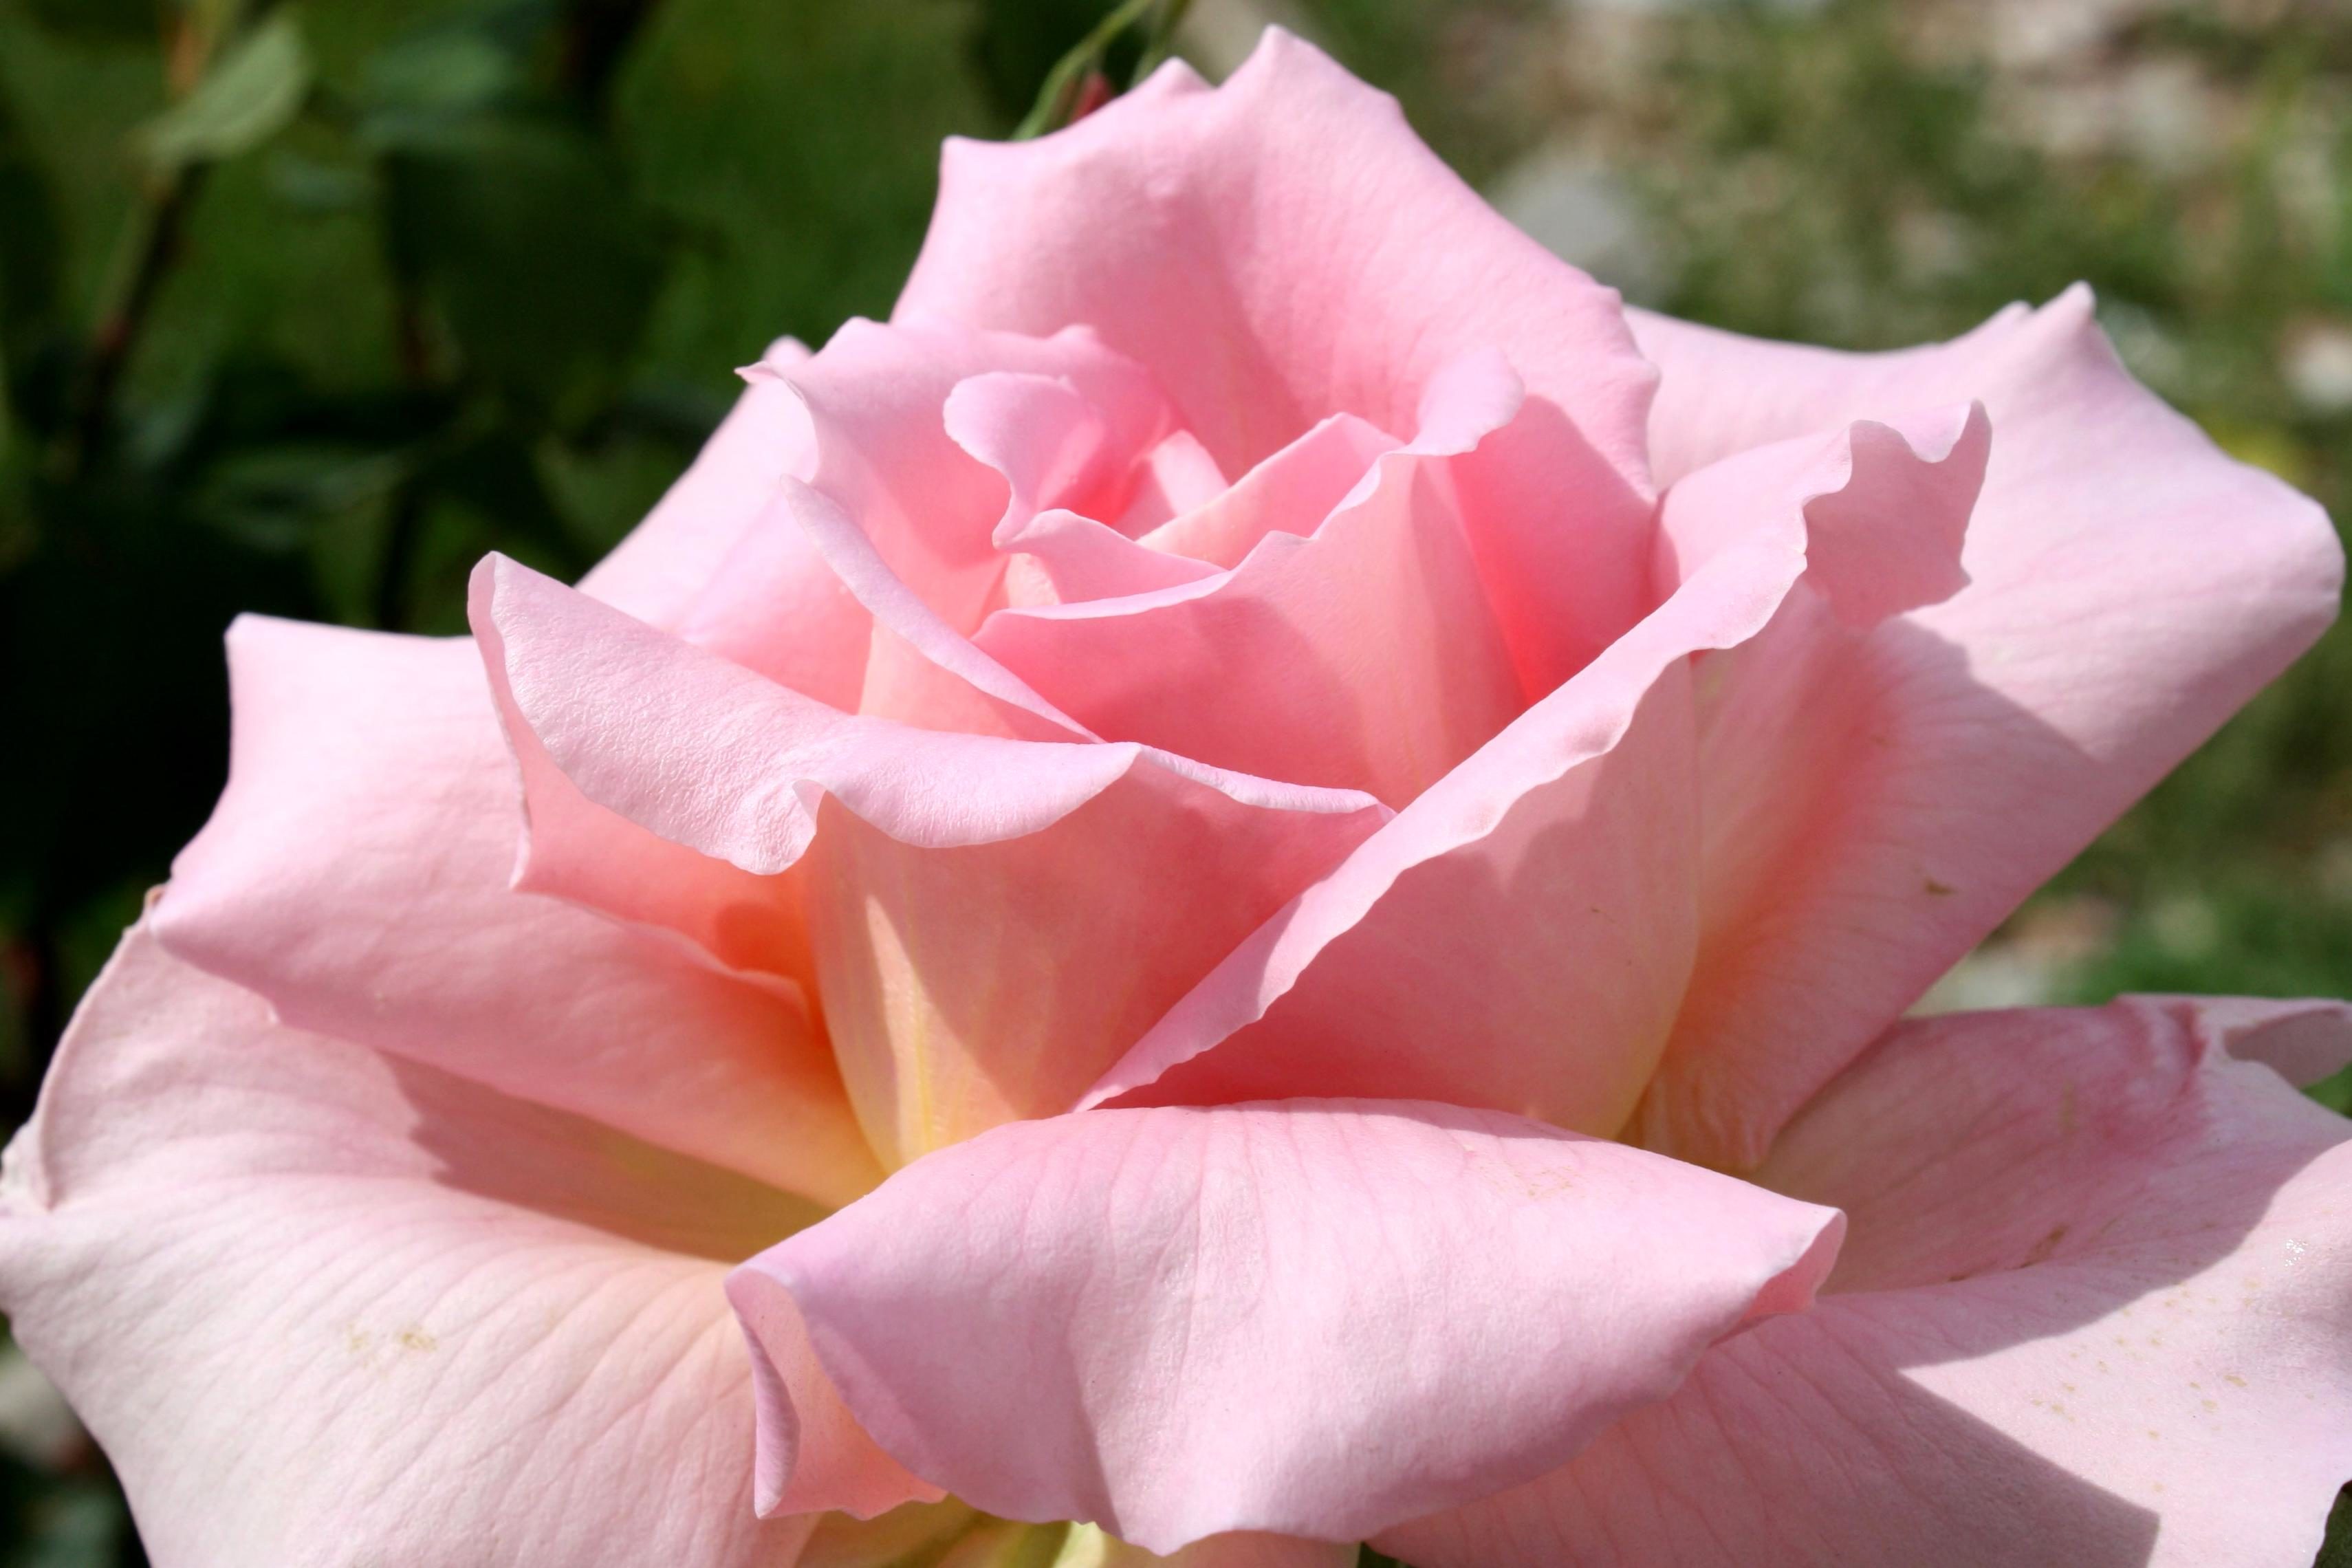 Free picture: pink rose flowers, rose petals, garden